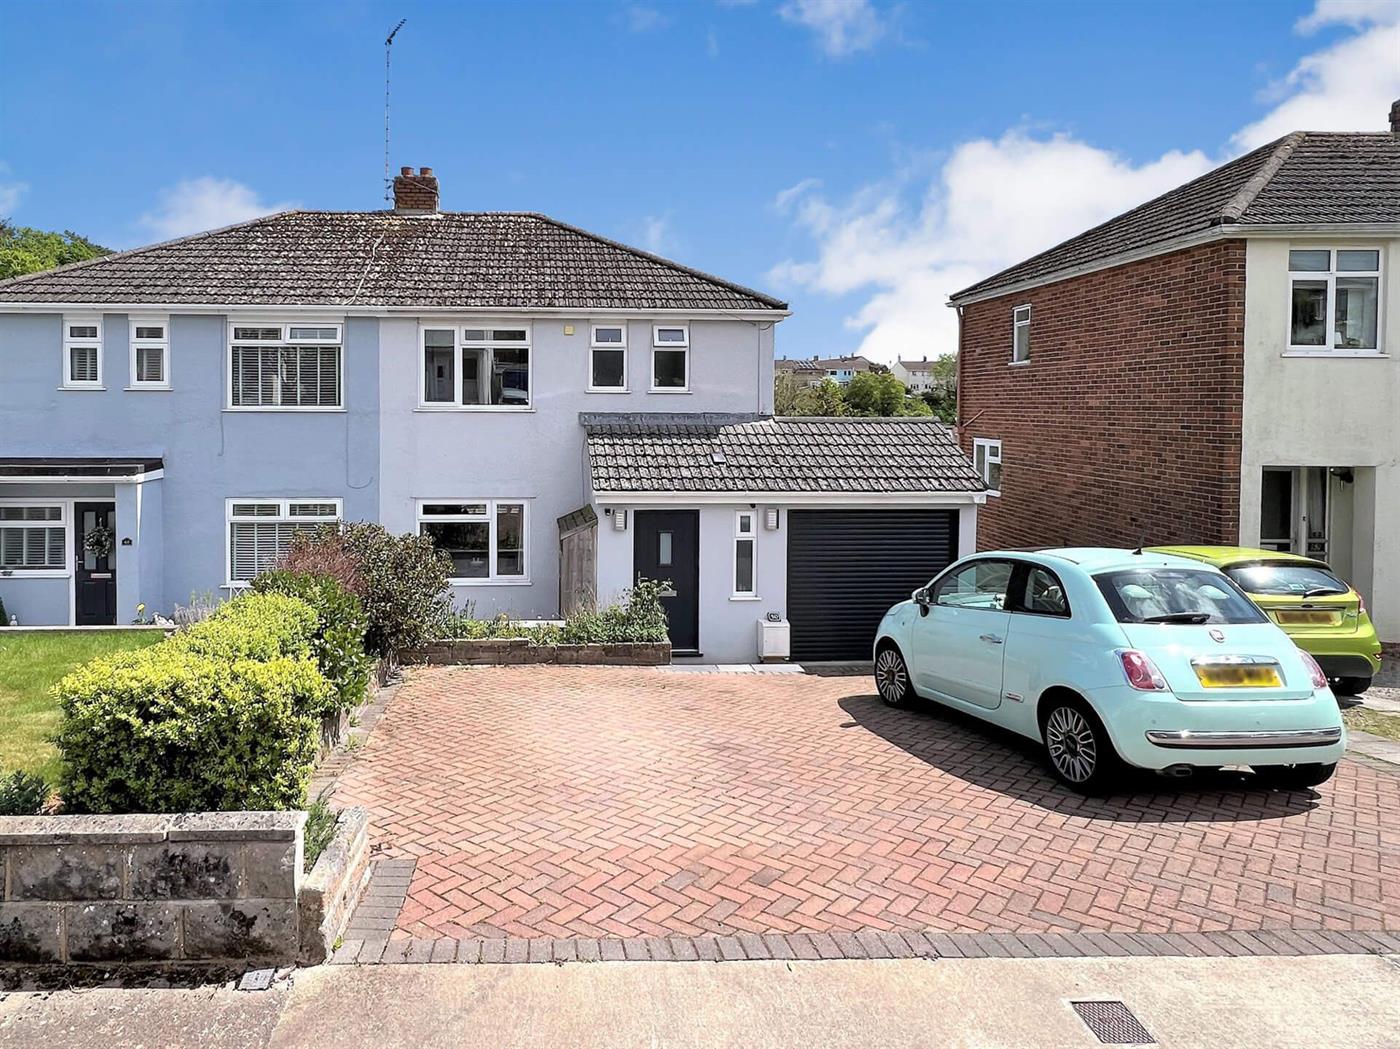 4 Bedroom Semi-Detached House for Sale (Sold): Frobisher Green, Chelston, Torquay, TQ2 6JH